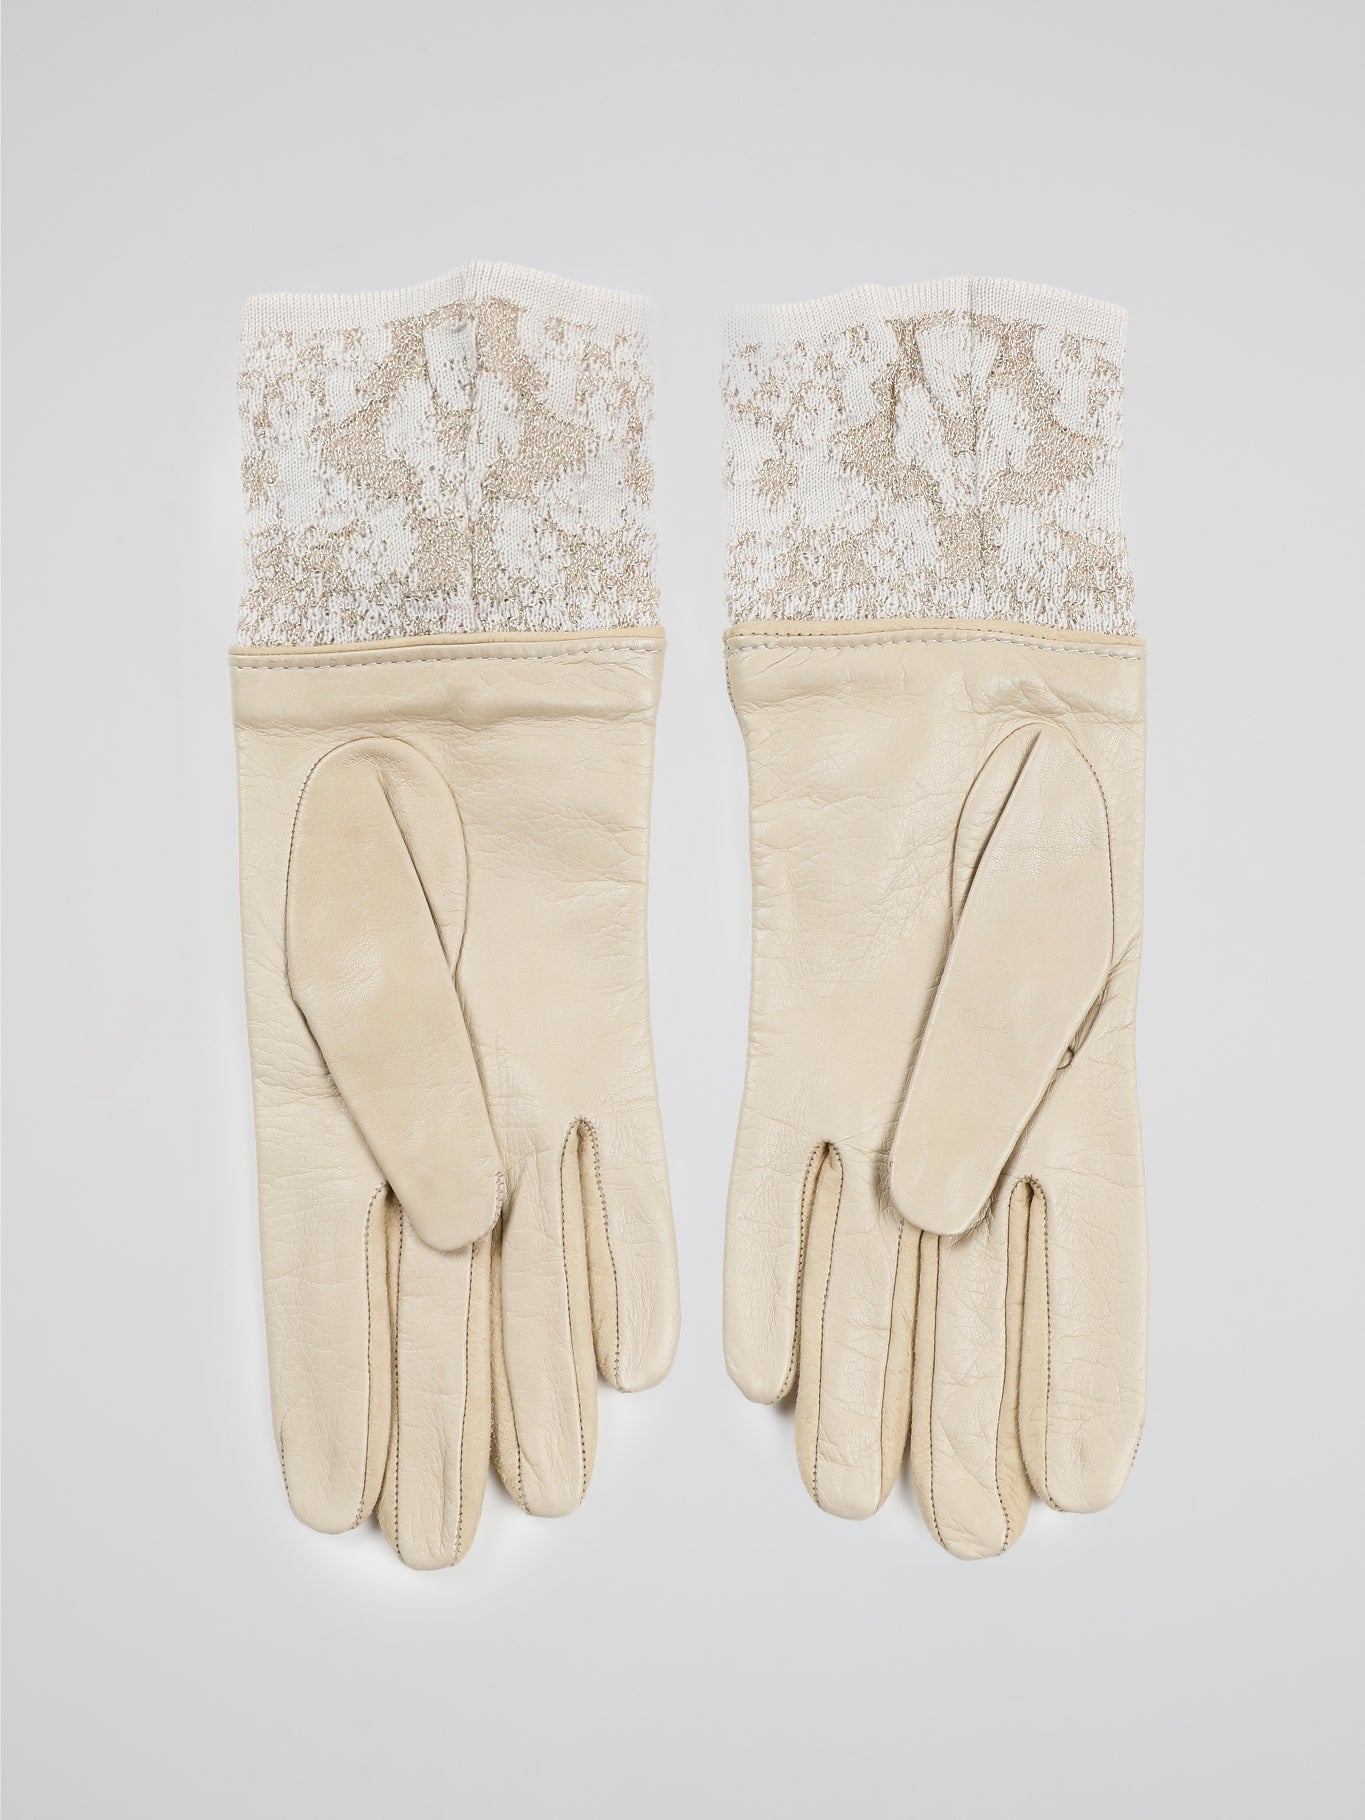 Step into luxury with these exquisite Beige Logo Embellished Gloves by Roberto Cavalli. Crafted with precision and elegance, these gloves feature the iconic Roberto Cavalli logo tastefully embellished on the fine beige leather. Whether you're strolling through the city or attending a glamorous event, these gloves will add a touch of opulence and sophistication to any outfit.